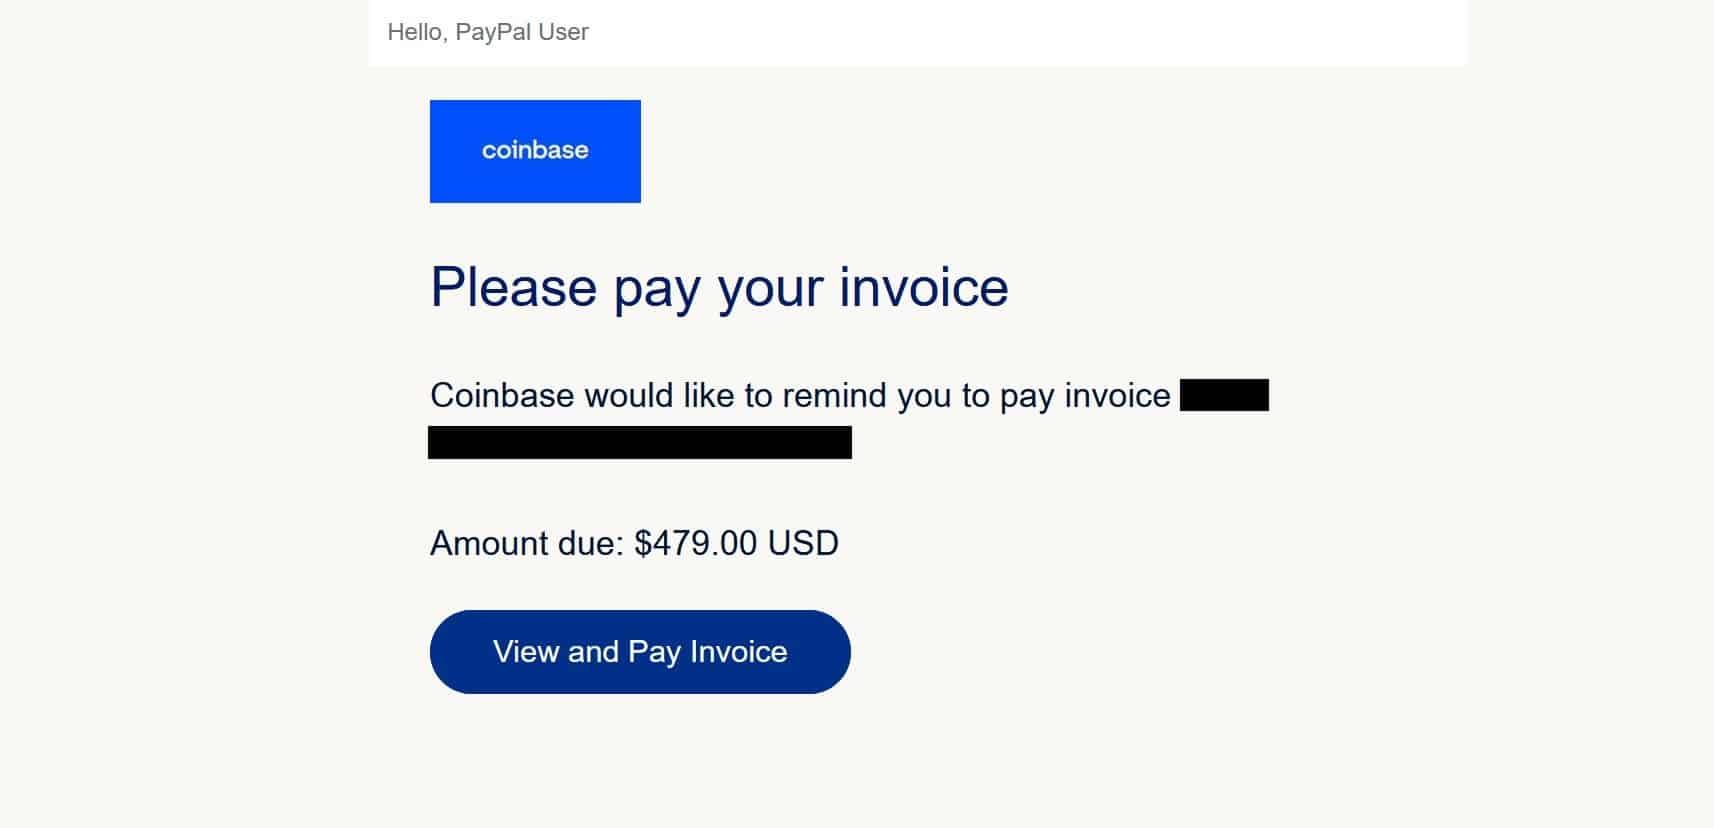 Did you get an unexpected invoice from PayPal? It’s a scam